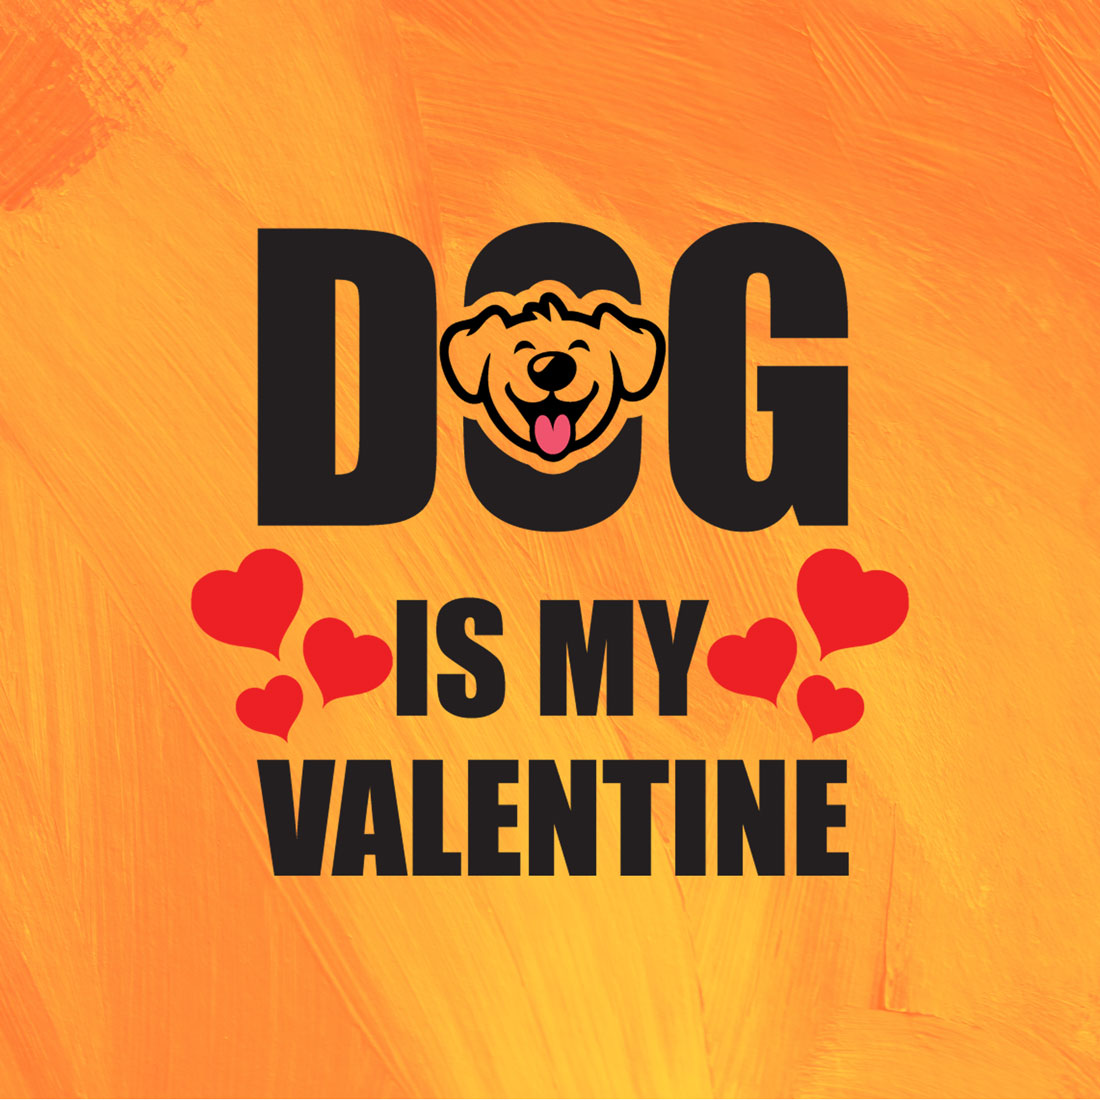 Dog Is My Valentine cover image.